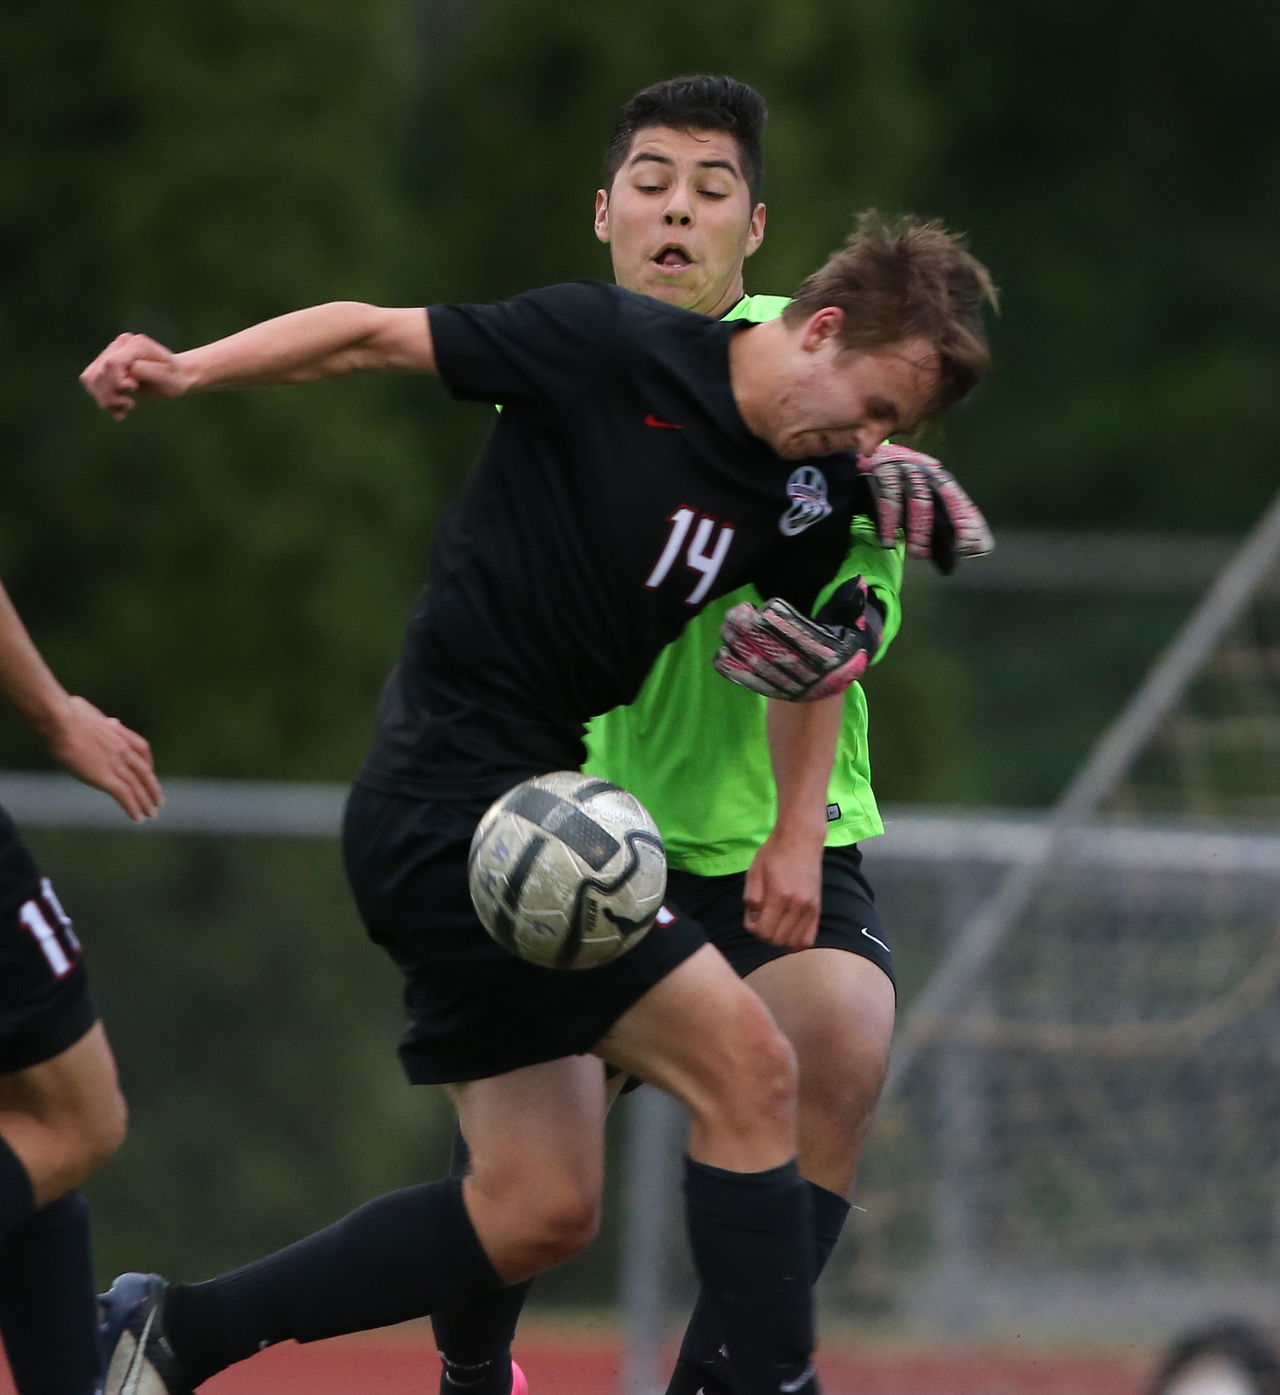 Union’s Jake Gould (front) gets to the ball first against Mariner goalkeeper Drexel Cardona during a first-round match of the 4A state boys soccer tournament Wednesday at Goddard Stadium in Everett.